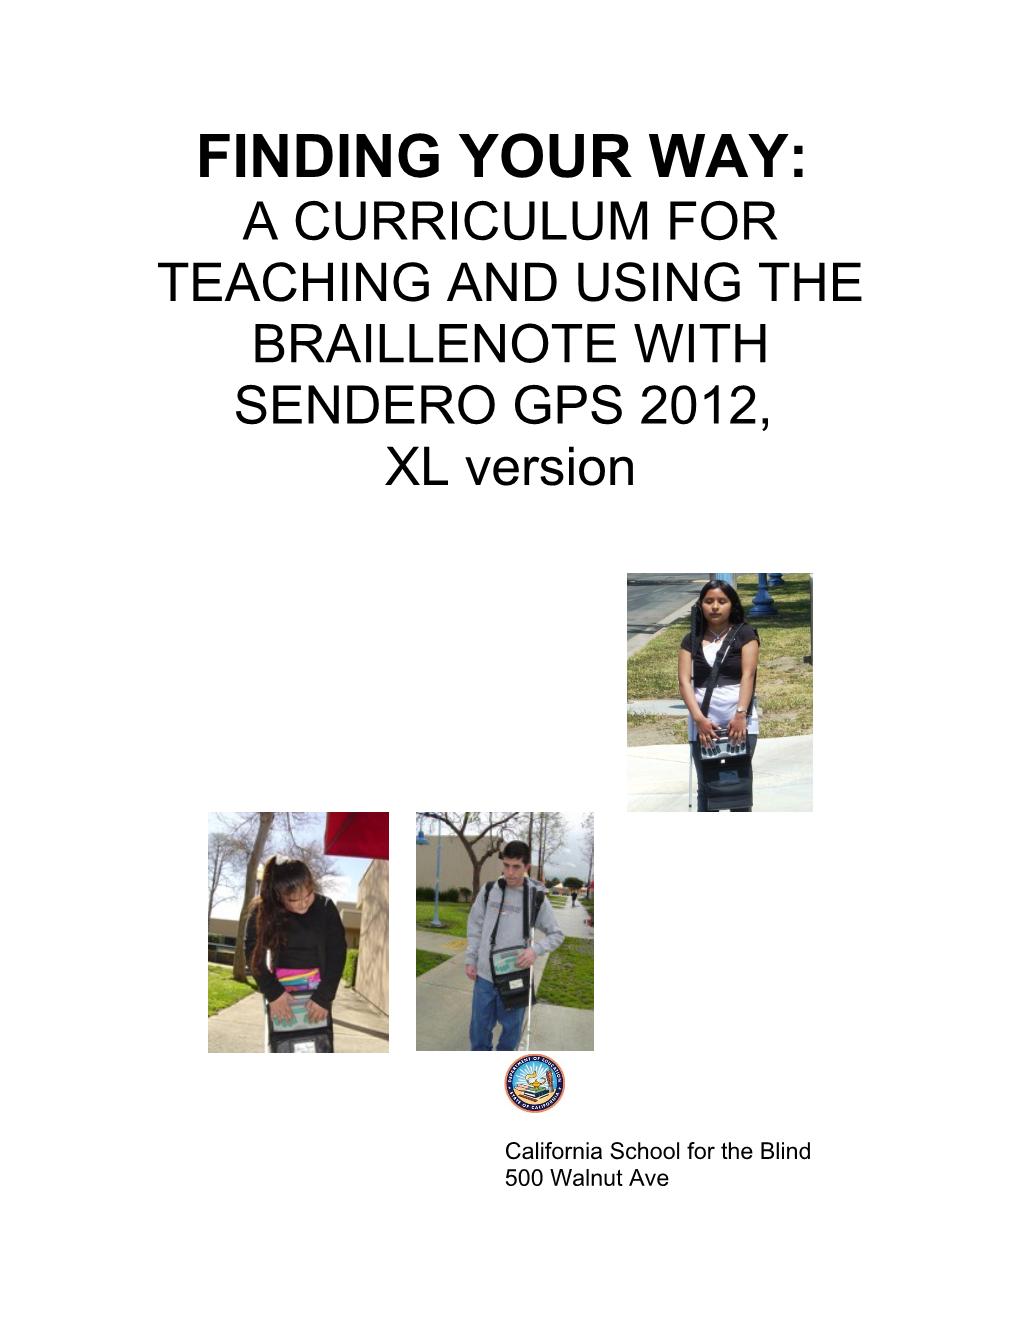 A Curriculum for Teaching and Using the Braillenote with Sendero Gps2012